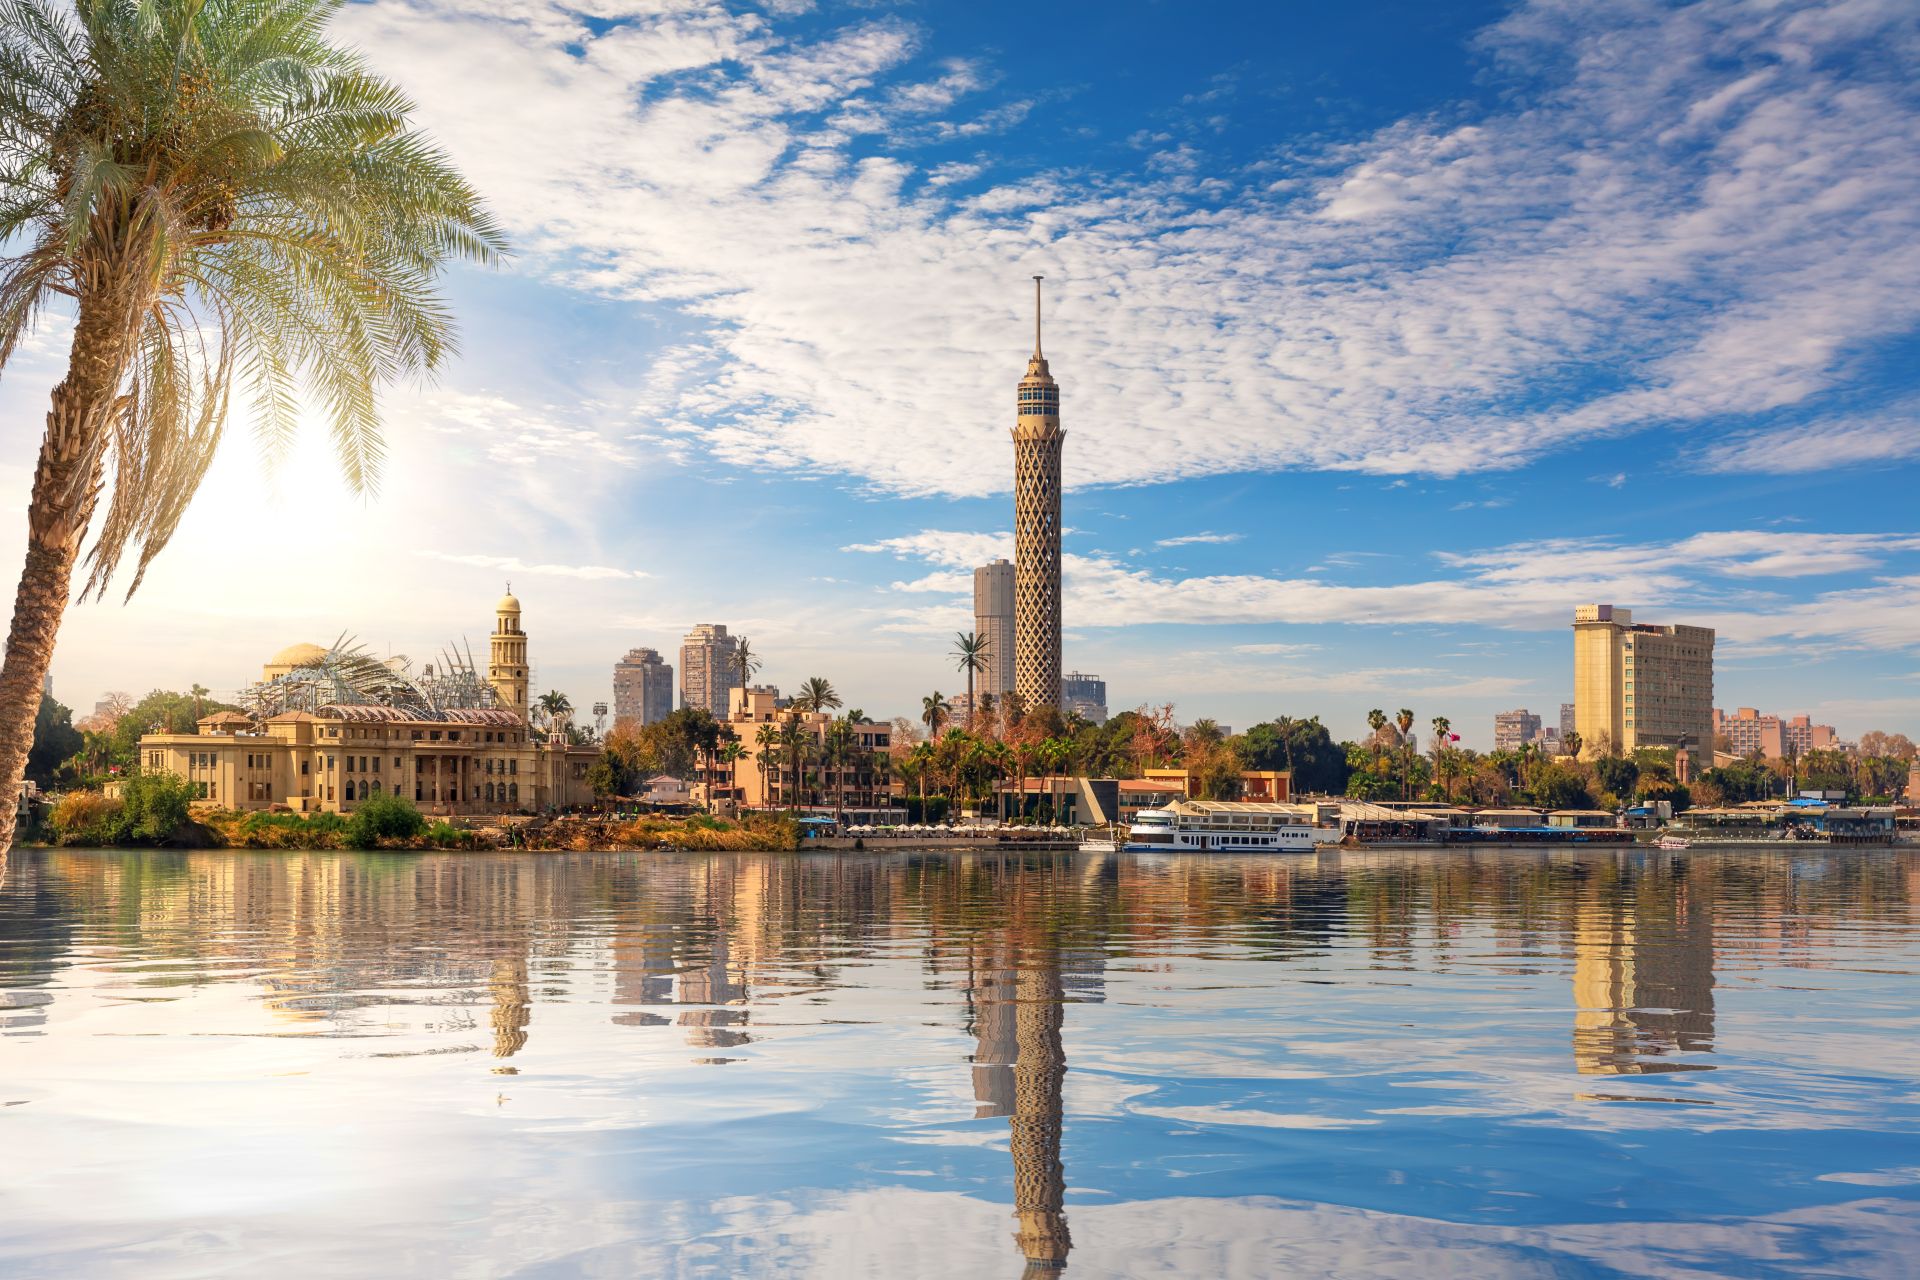 Downtown Cairo, view of Gezira Island and the Nile Tower, Egypt